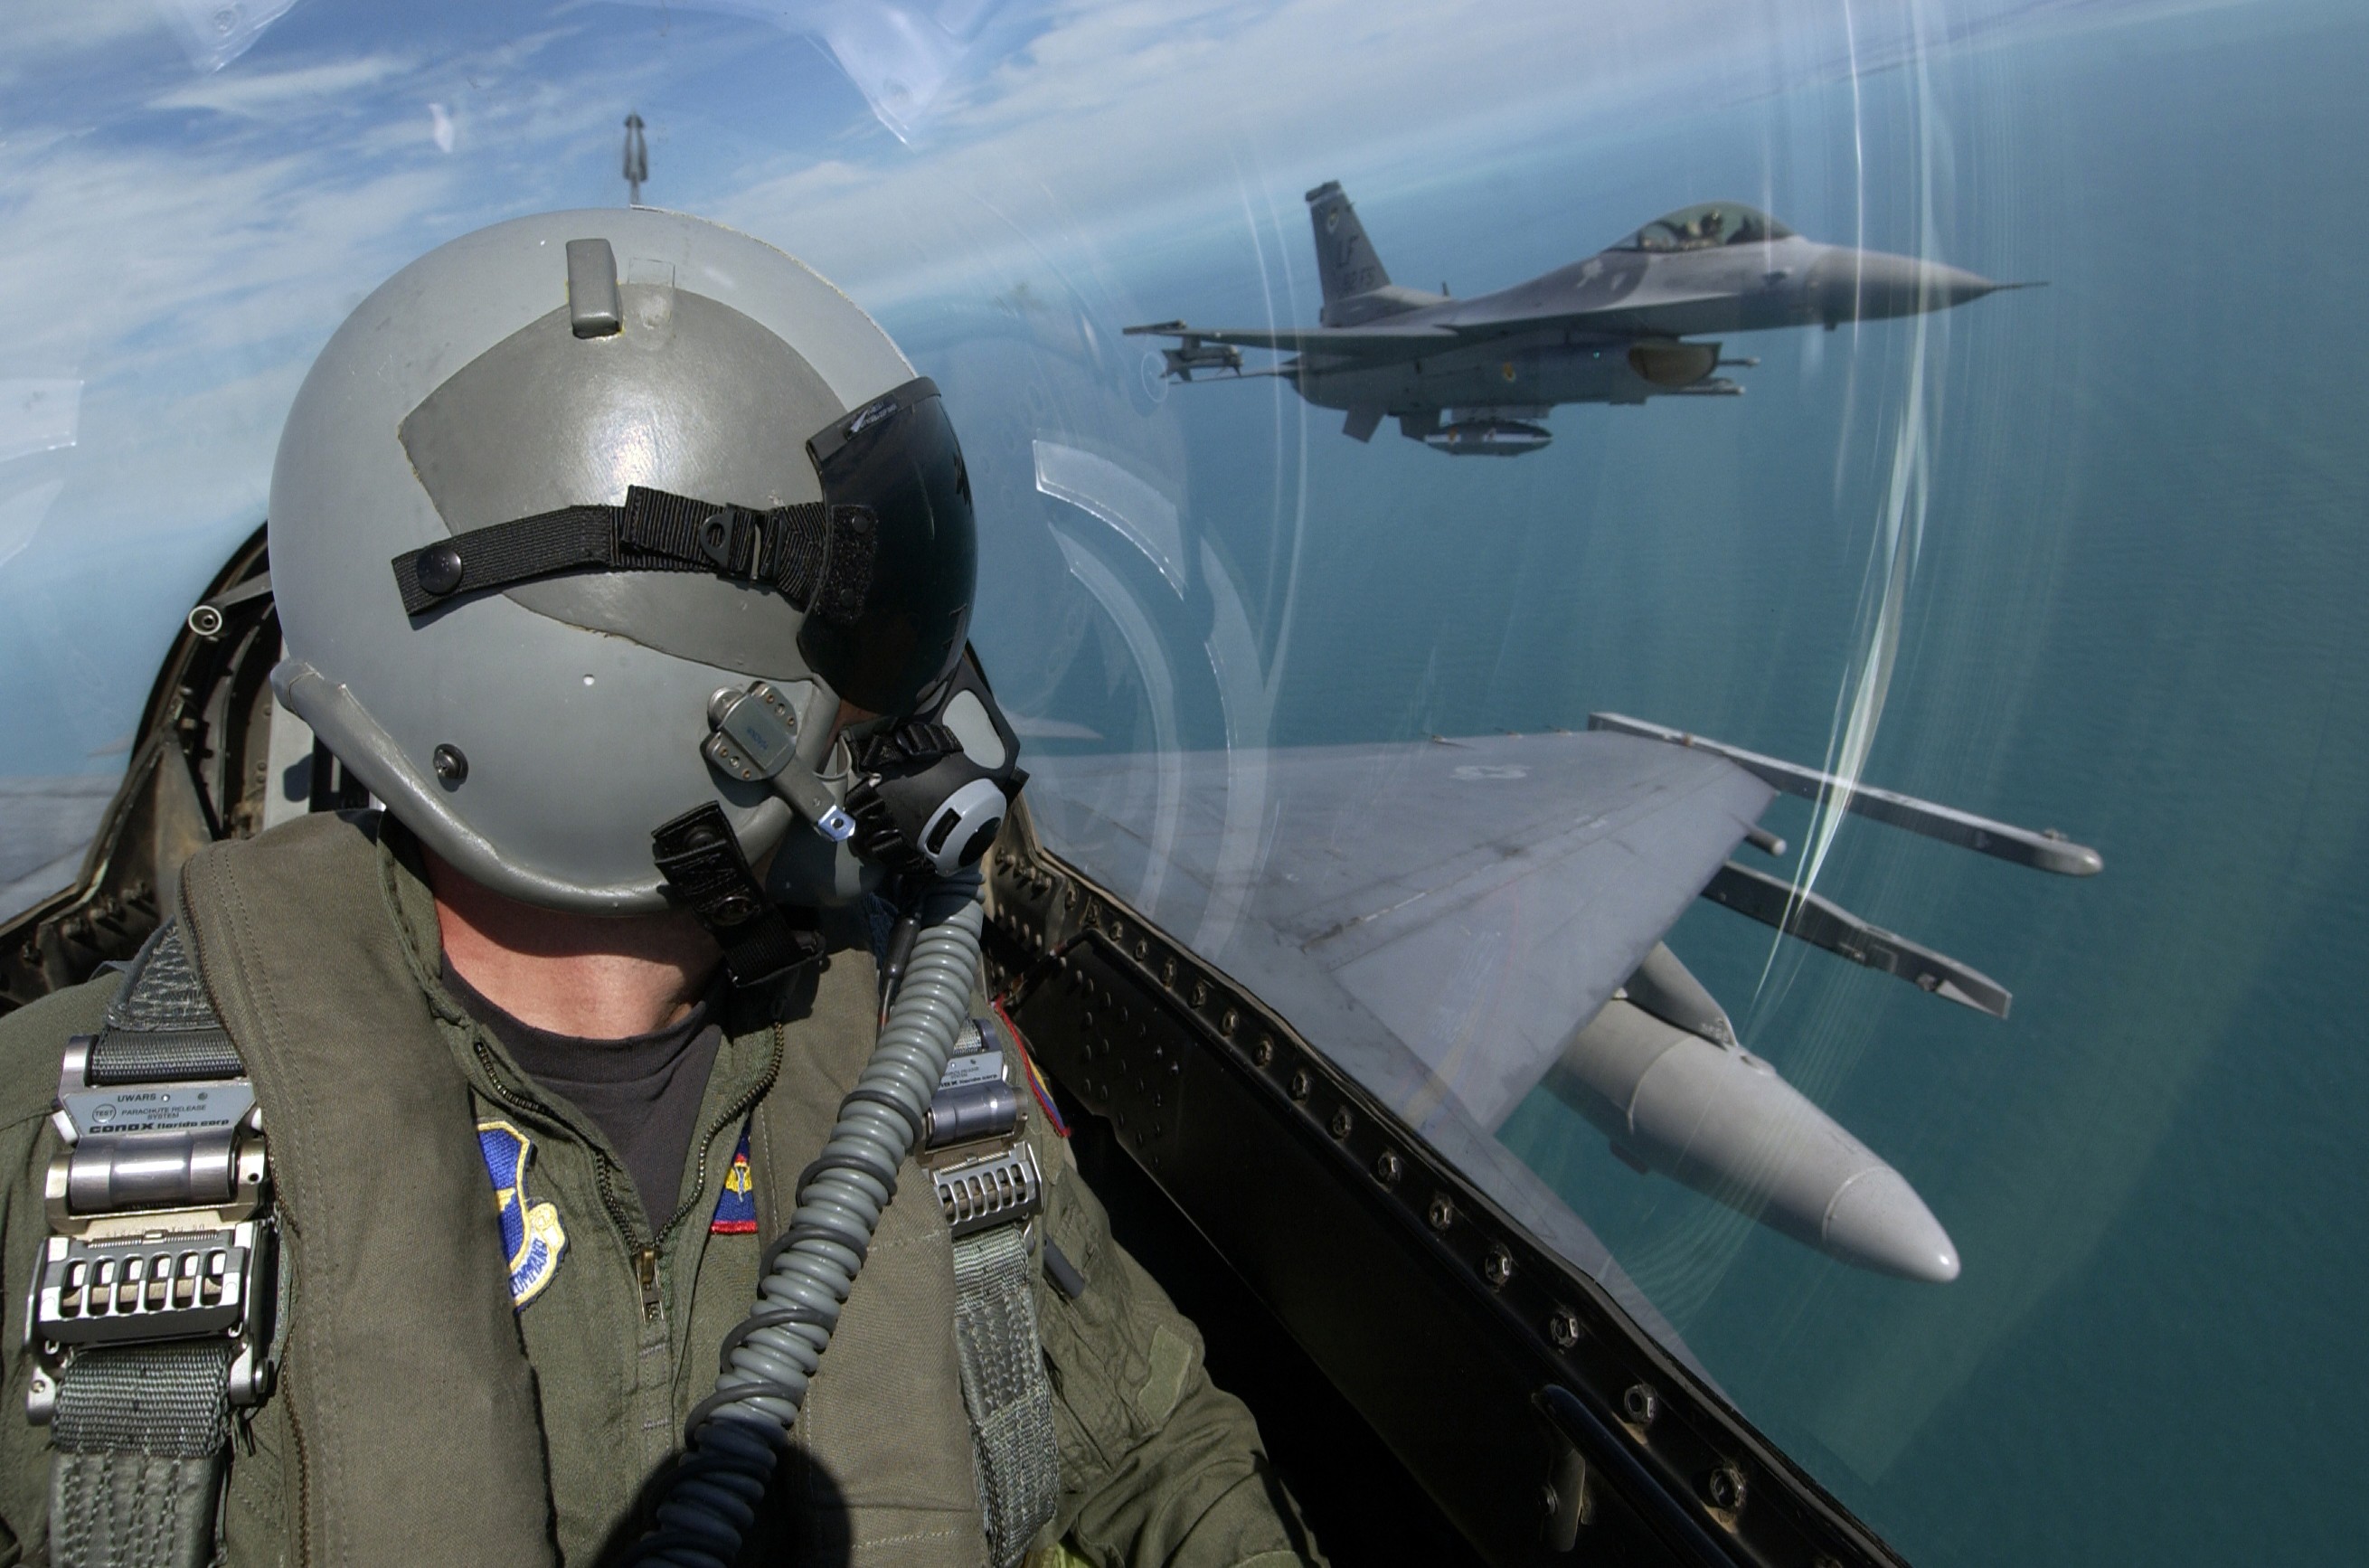 Aircraft Military Jet Fighter Pilote General Dynamics F 16 Fighting Falcon Cockpit Military Aircraft 2620x1734